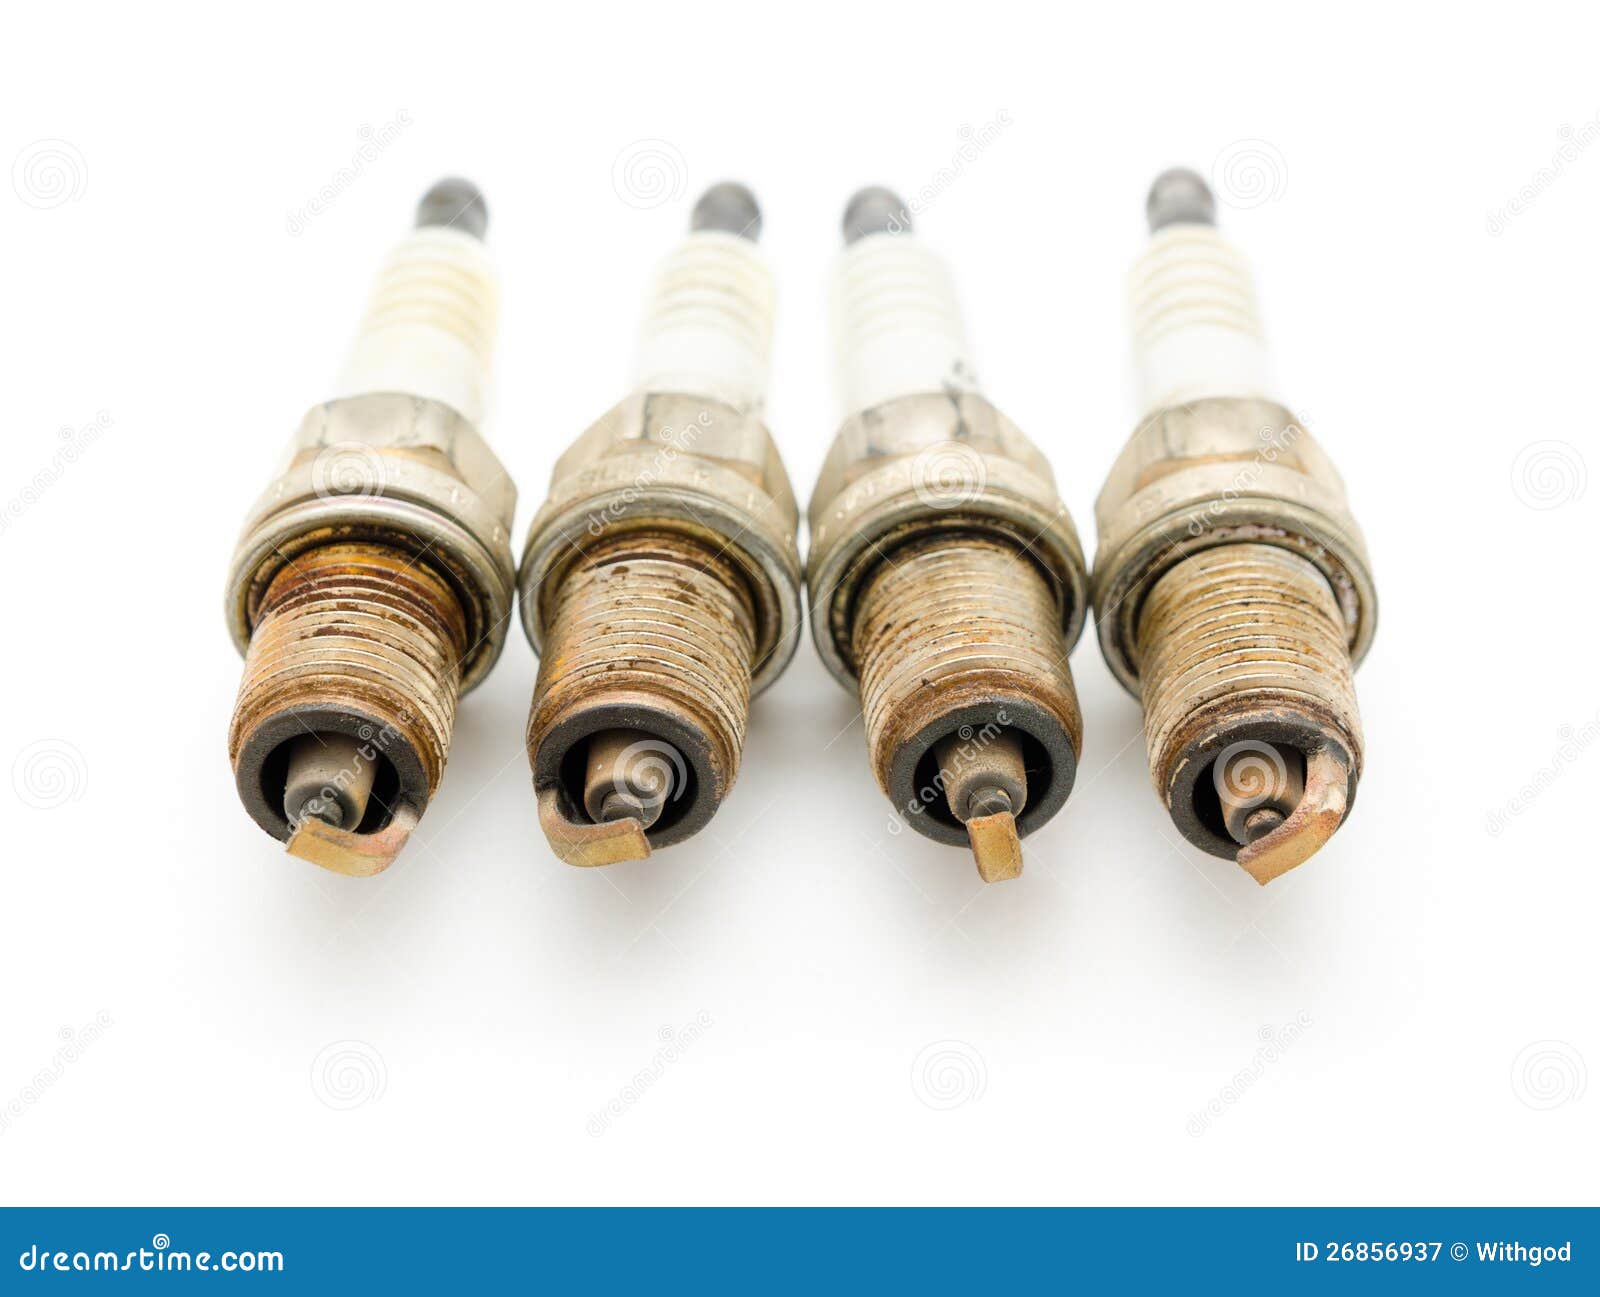 Old Spark Plugs Royalty Free Stock Photography - Image ...
